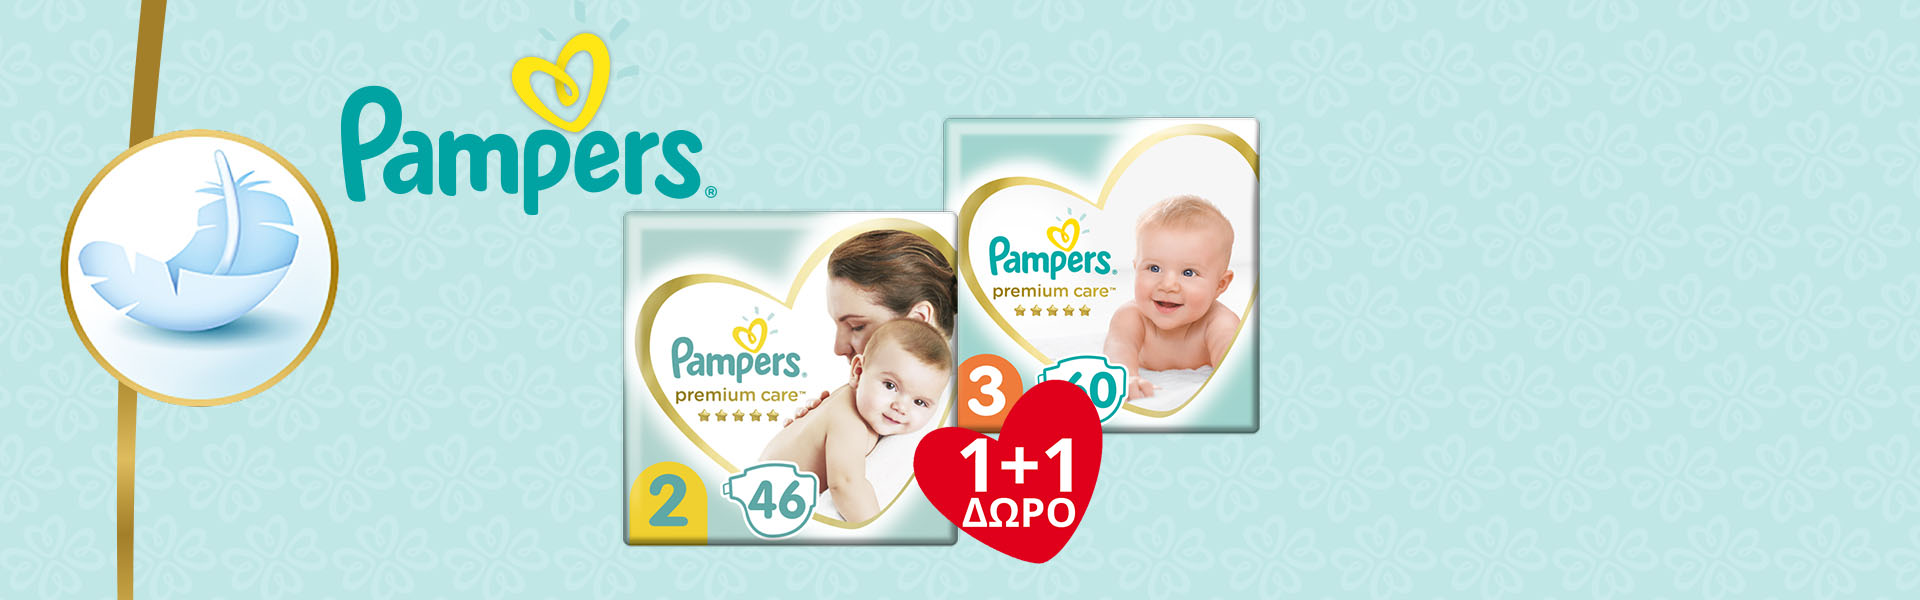 Pampers Premium and Pants 1+1 FREE